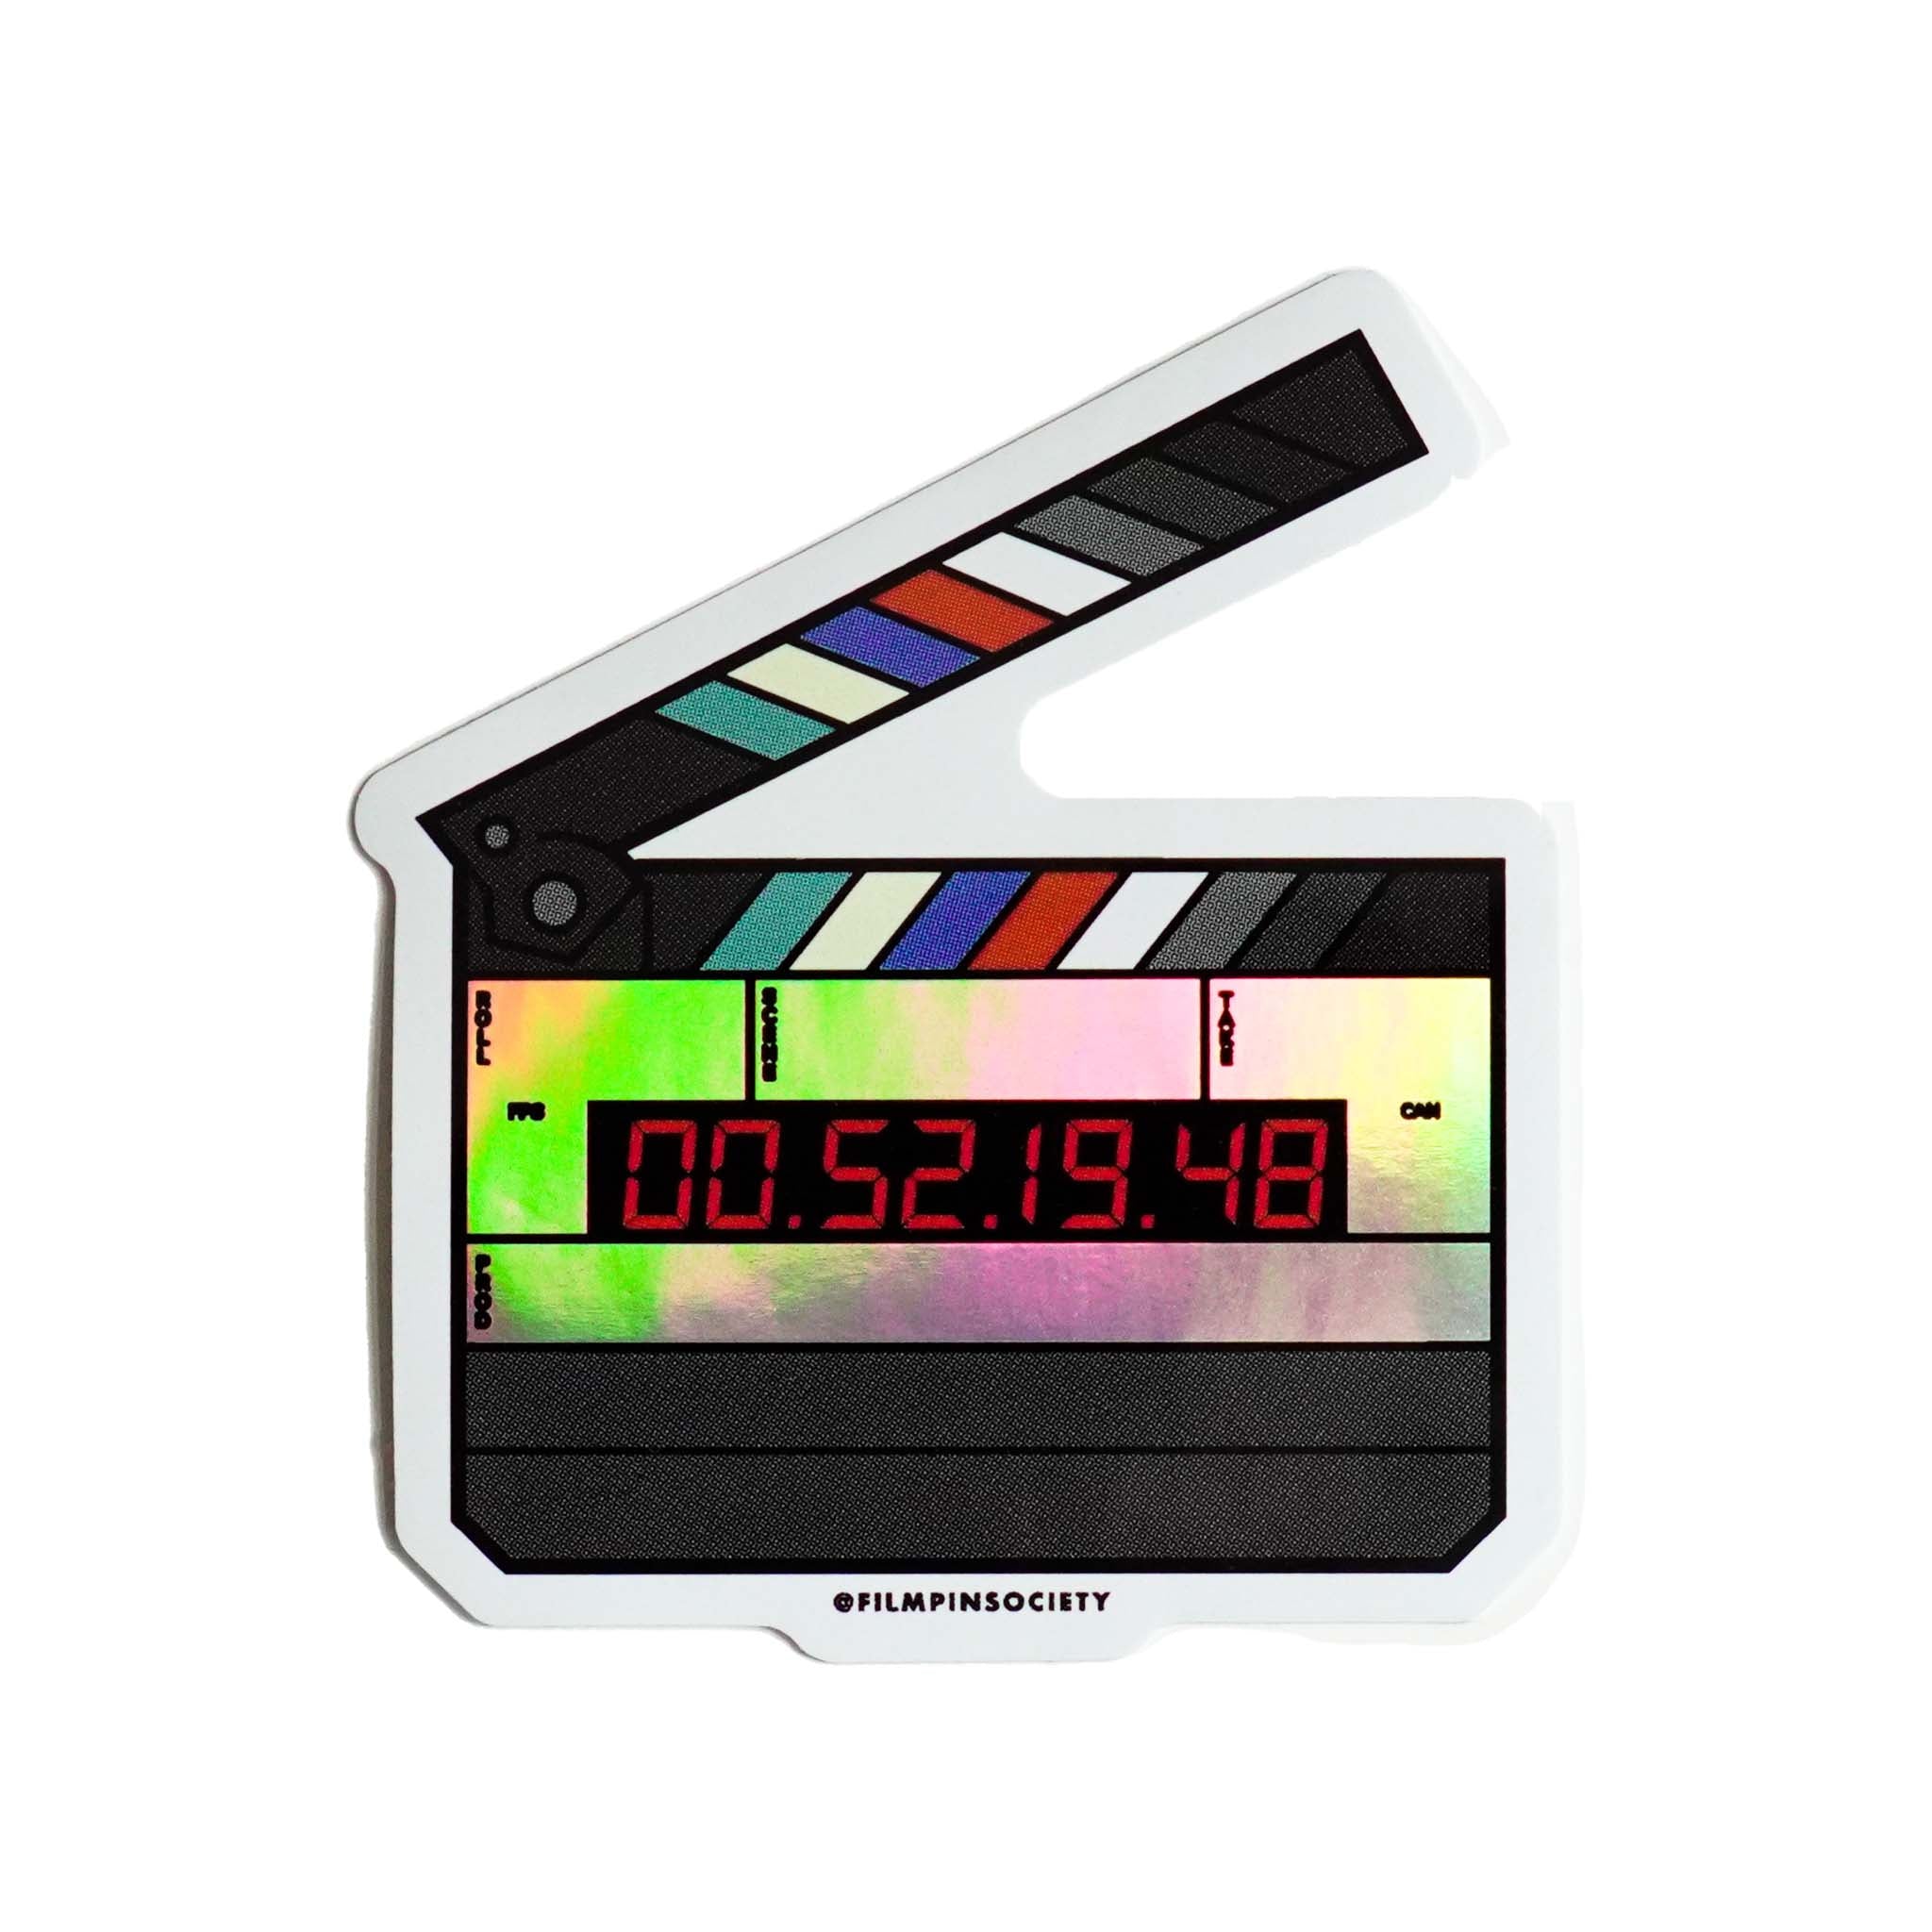 FILM PRODUCTION STICKER PACK